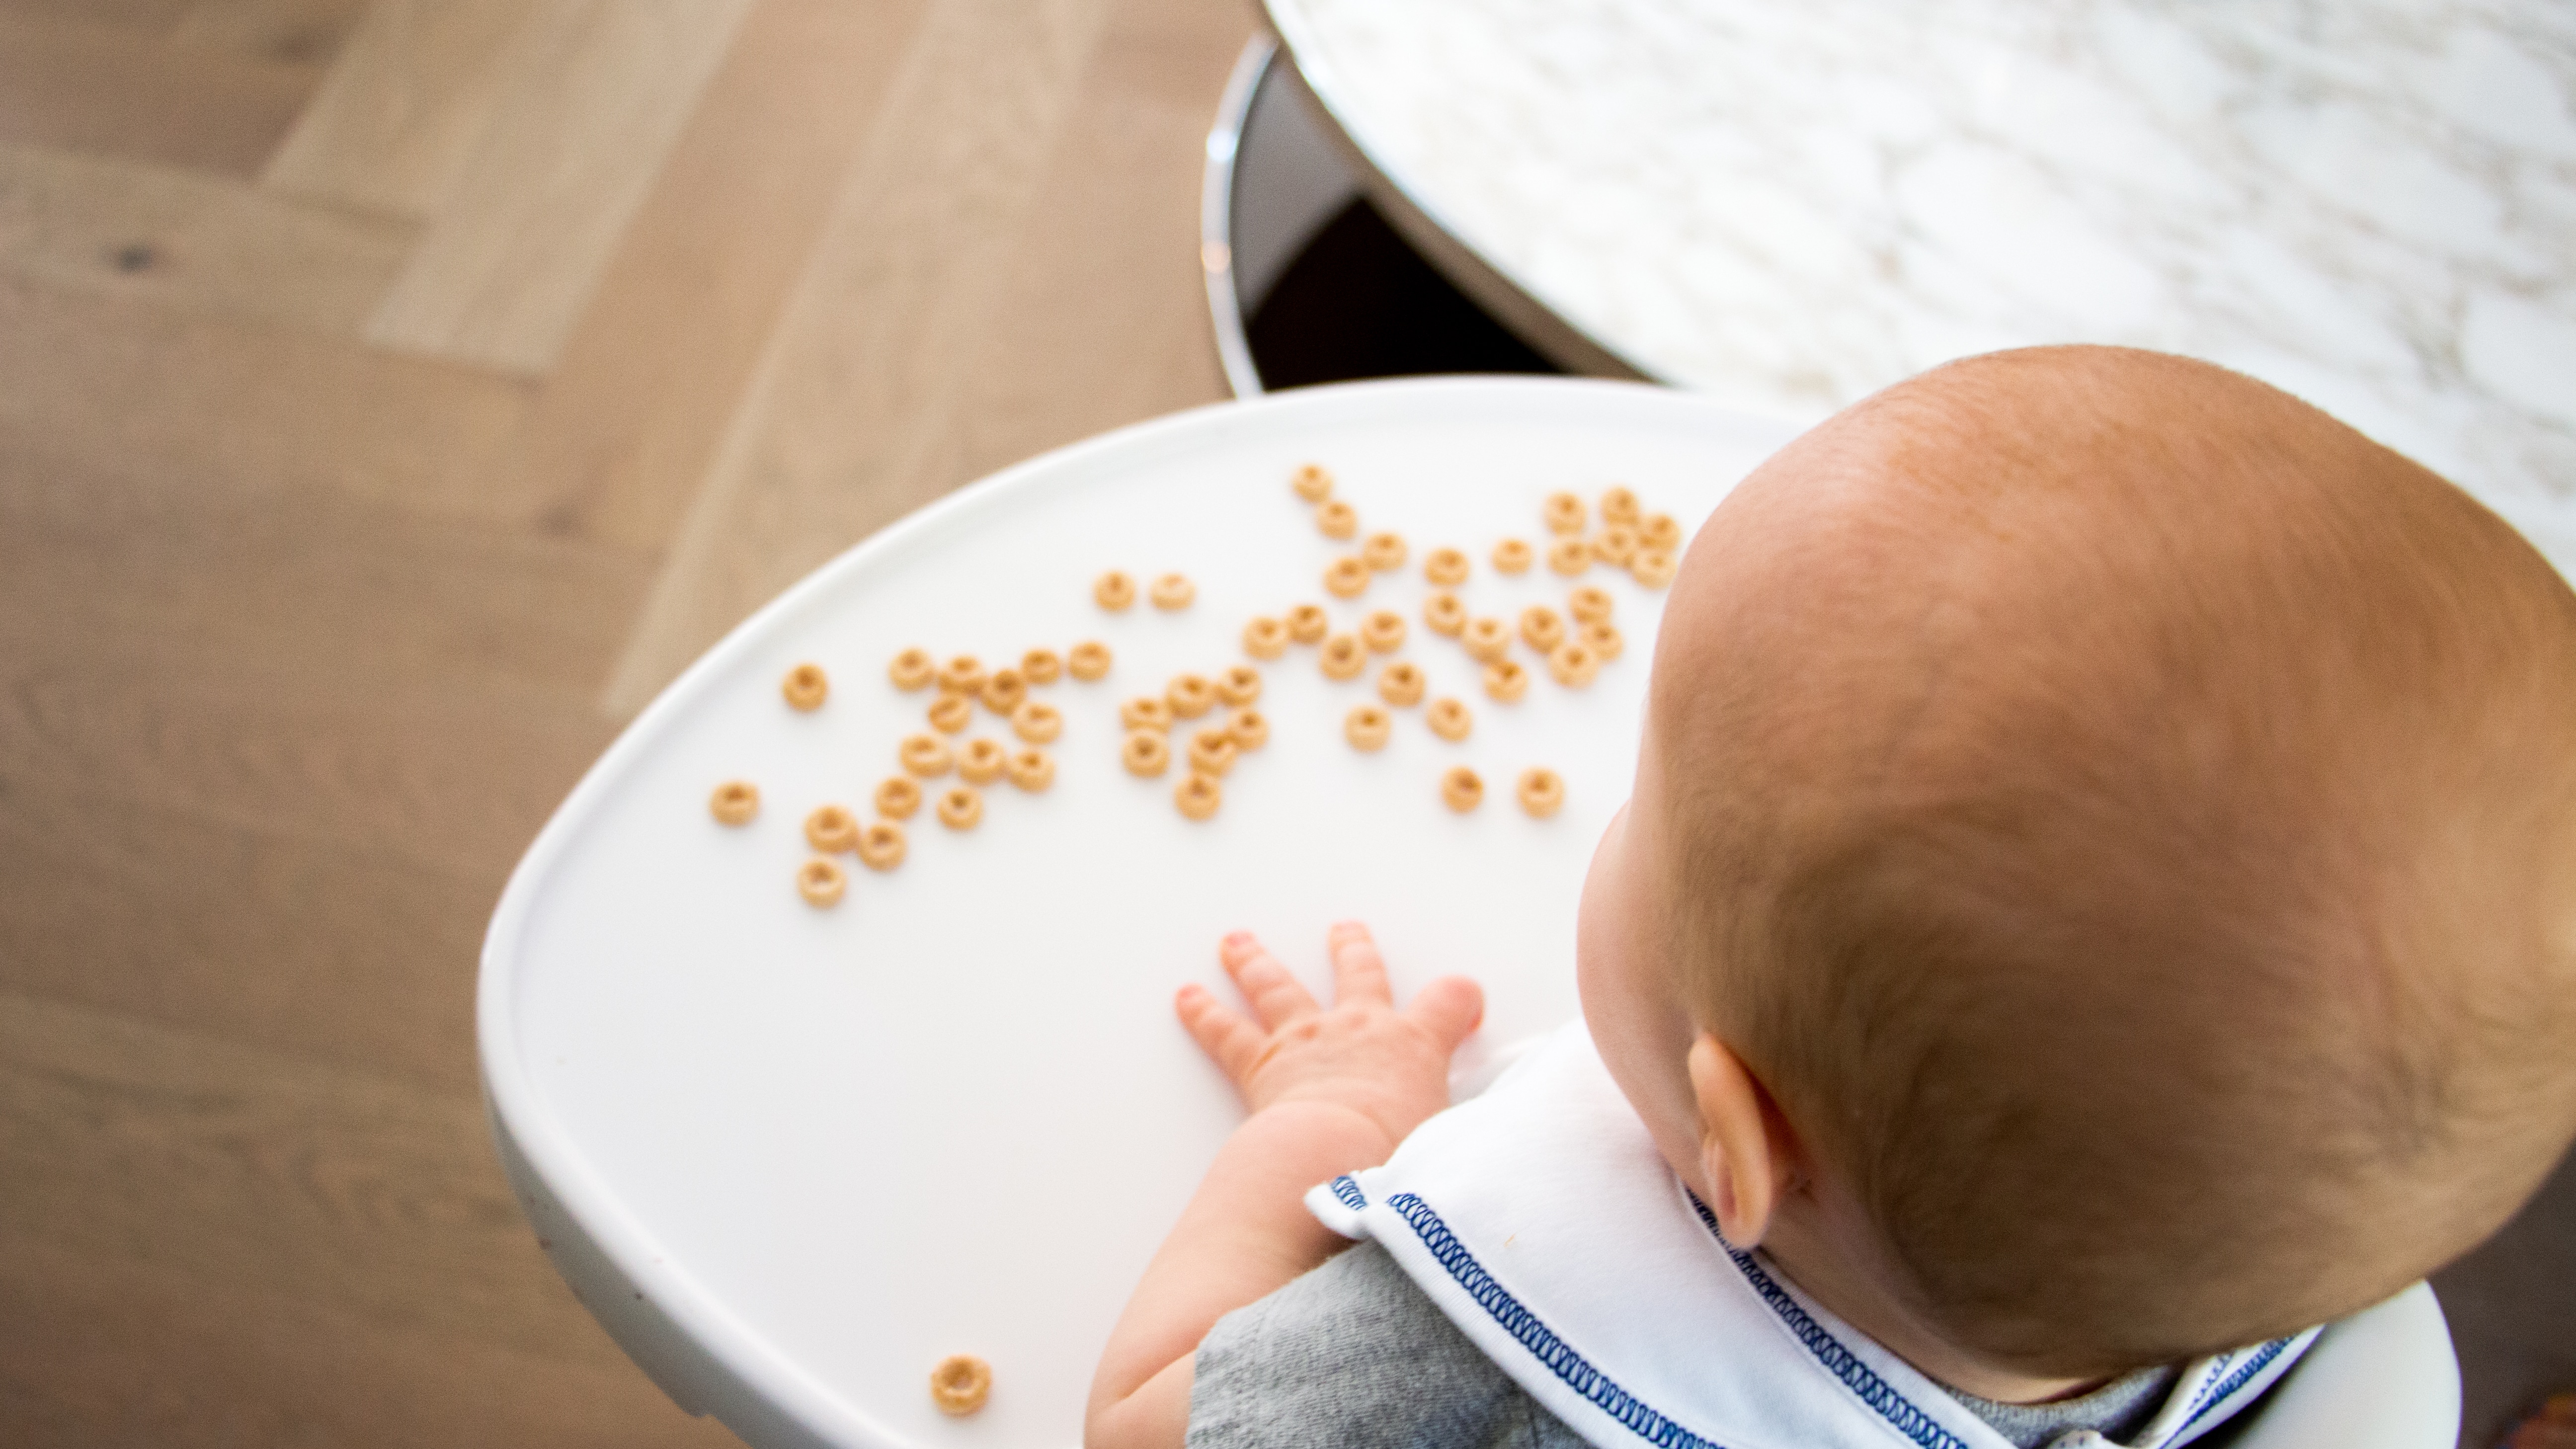 What Is Baby-Led Weaning? Benefits, Tips, and First Foods